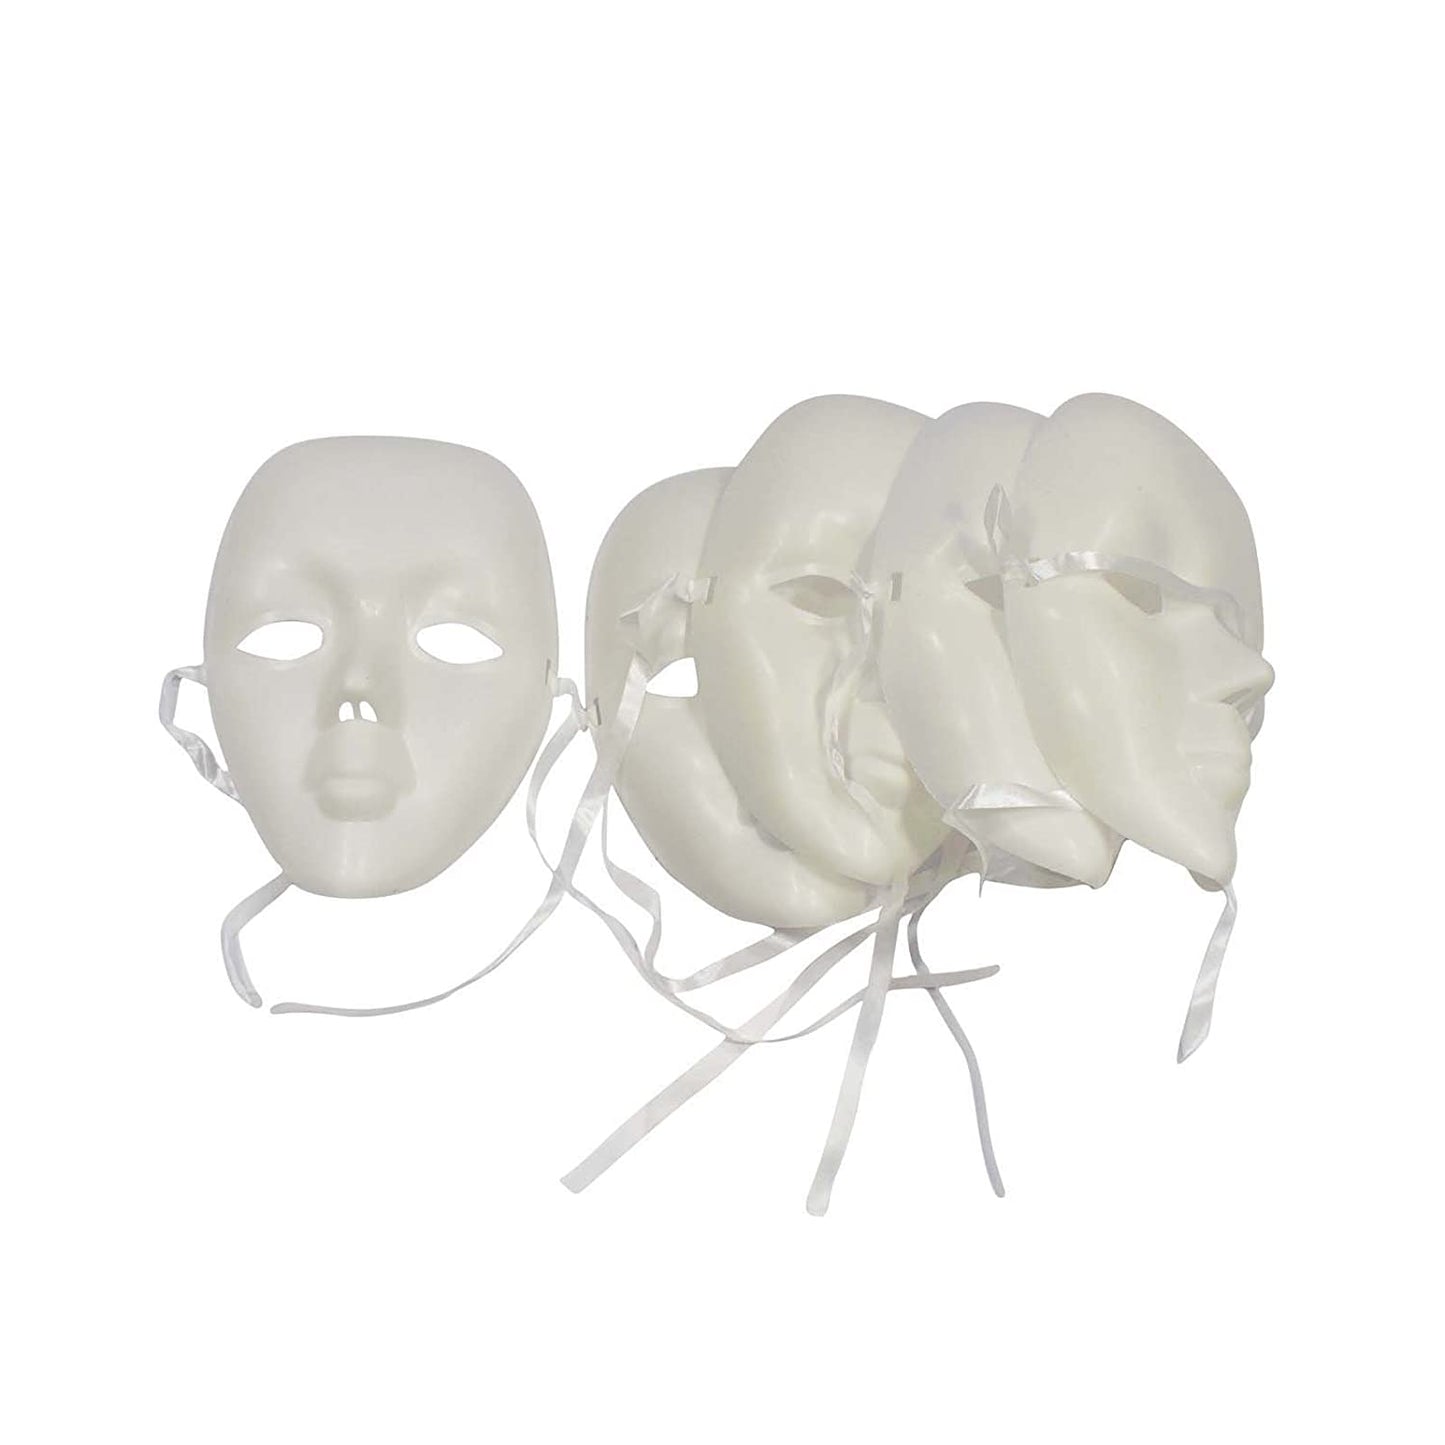 Plastic White Masks for Crafts and Party, Pack of 5 Masks, Standard Size